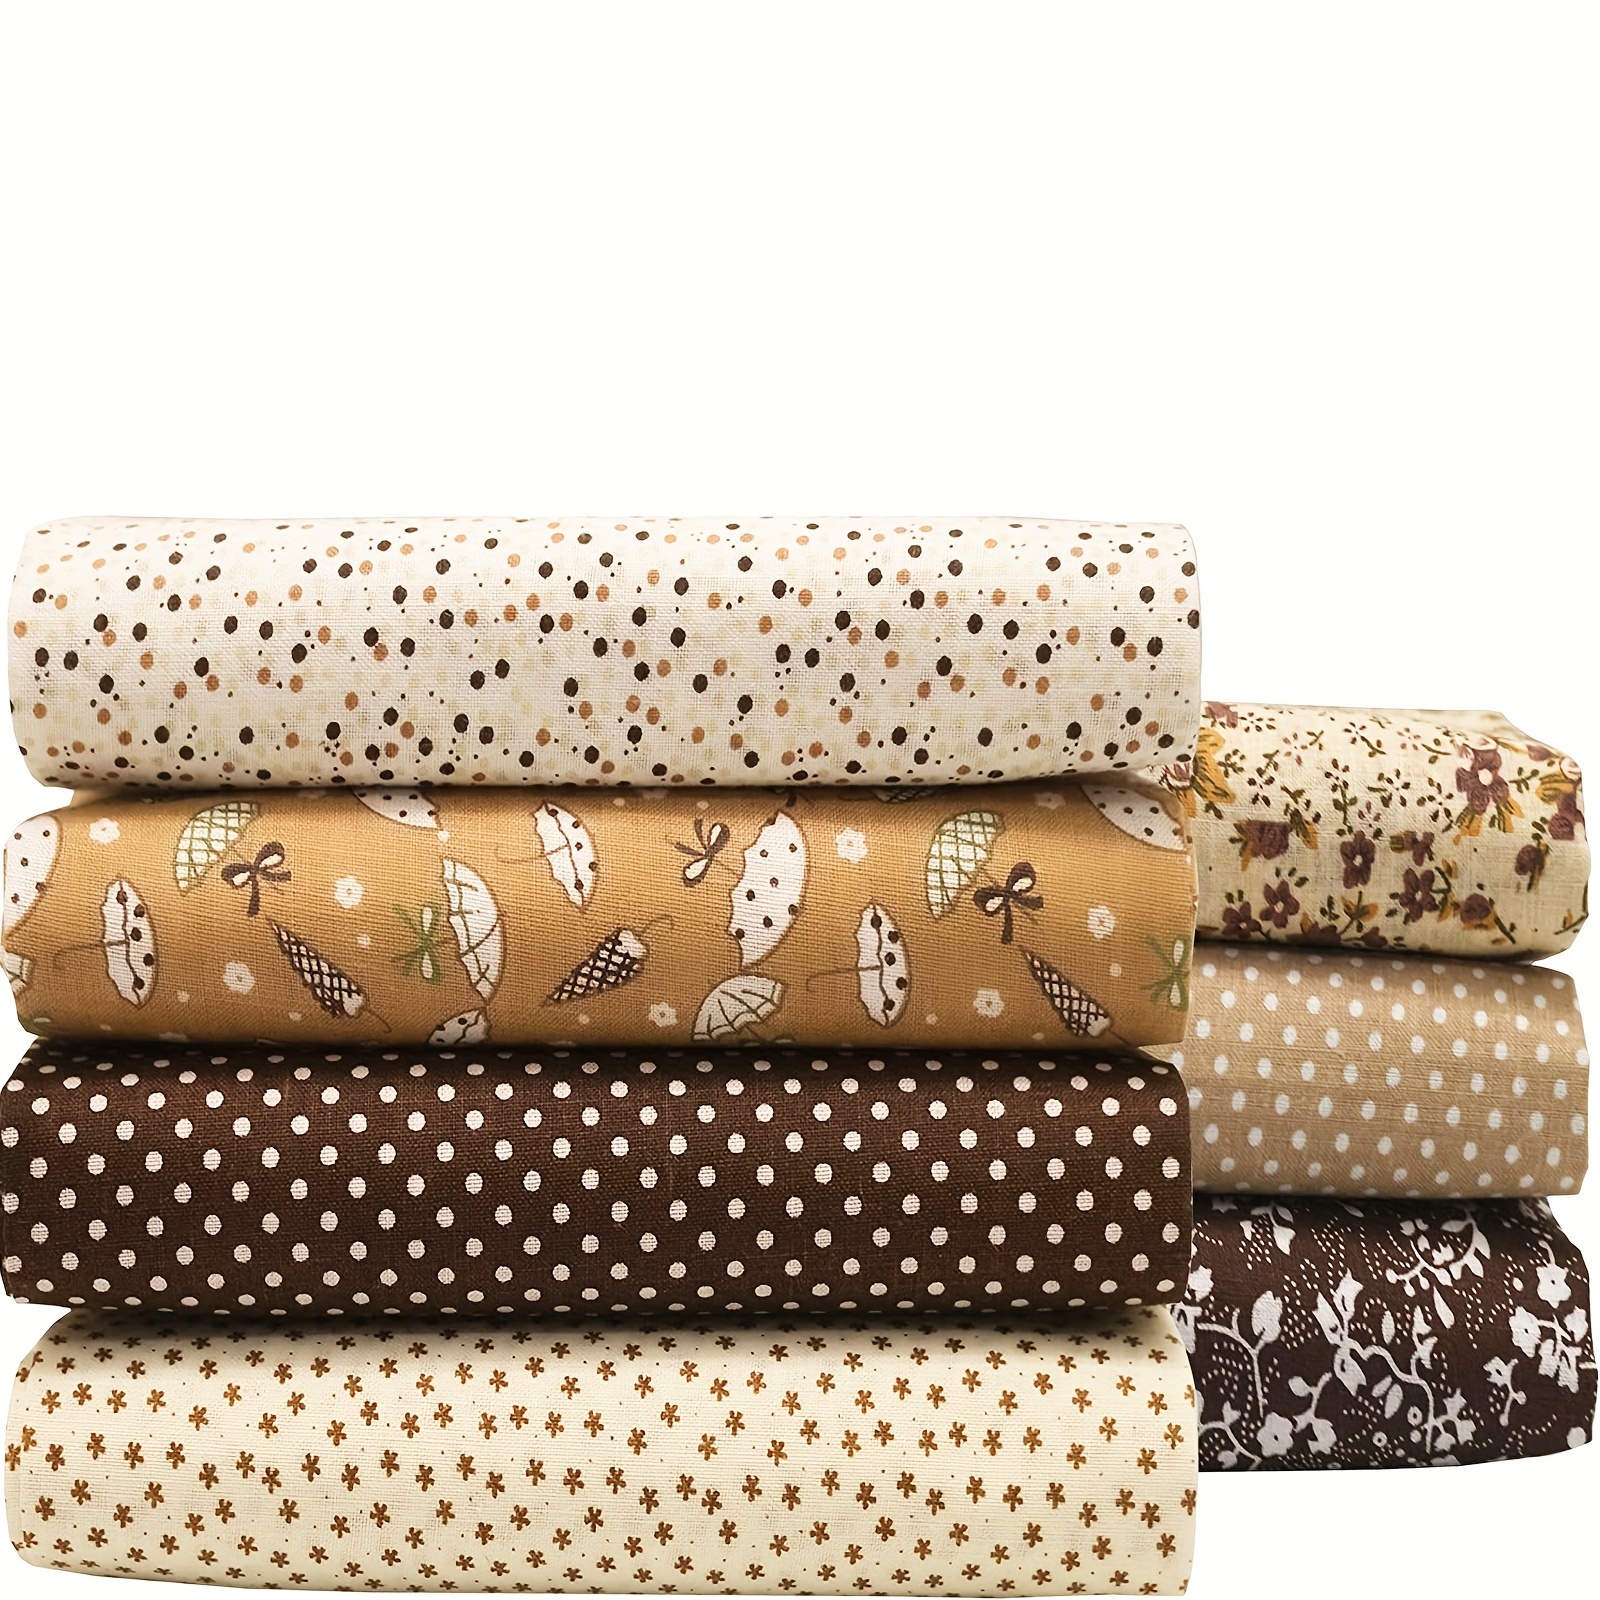 

7pcs 9.8*9.8in Coffee Fabric Quilting Sewing Crafts Textile Square Fabric Assortment With Different Patterns For Diy Handmade Sewing